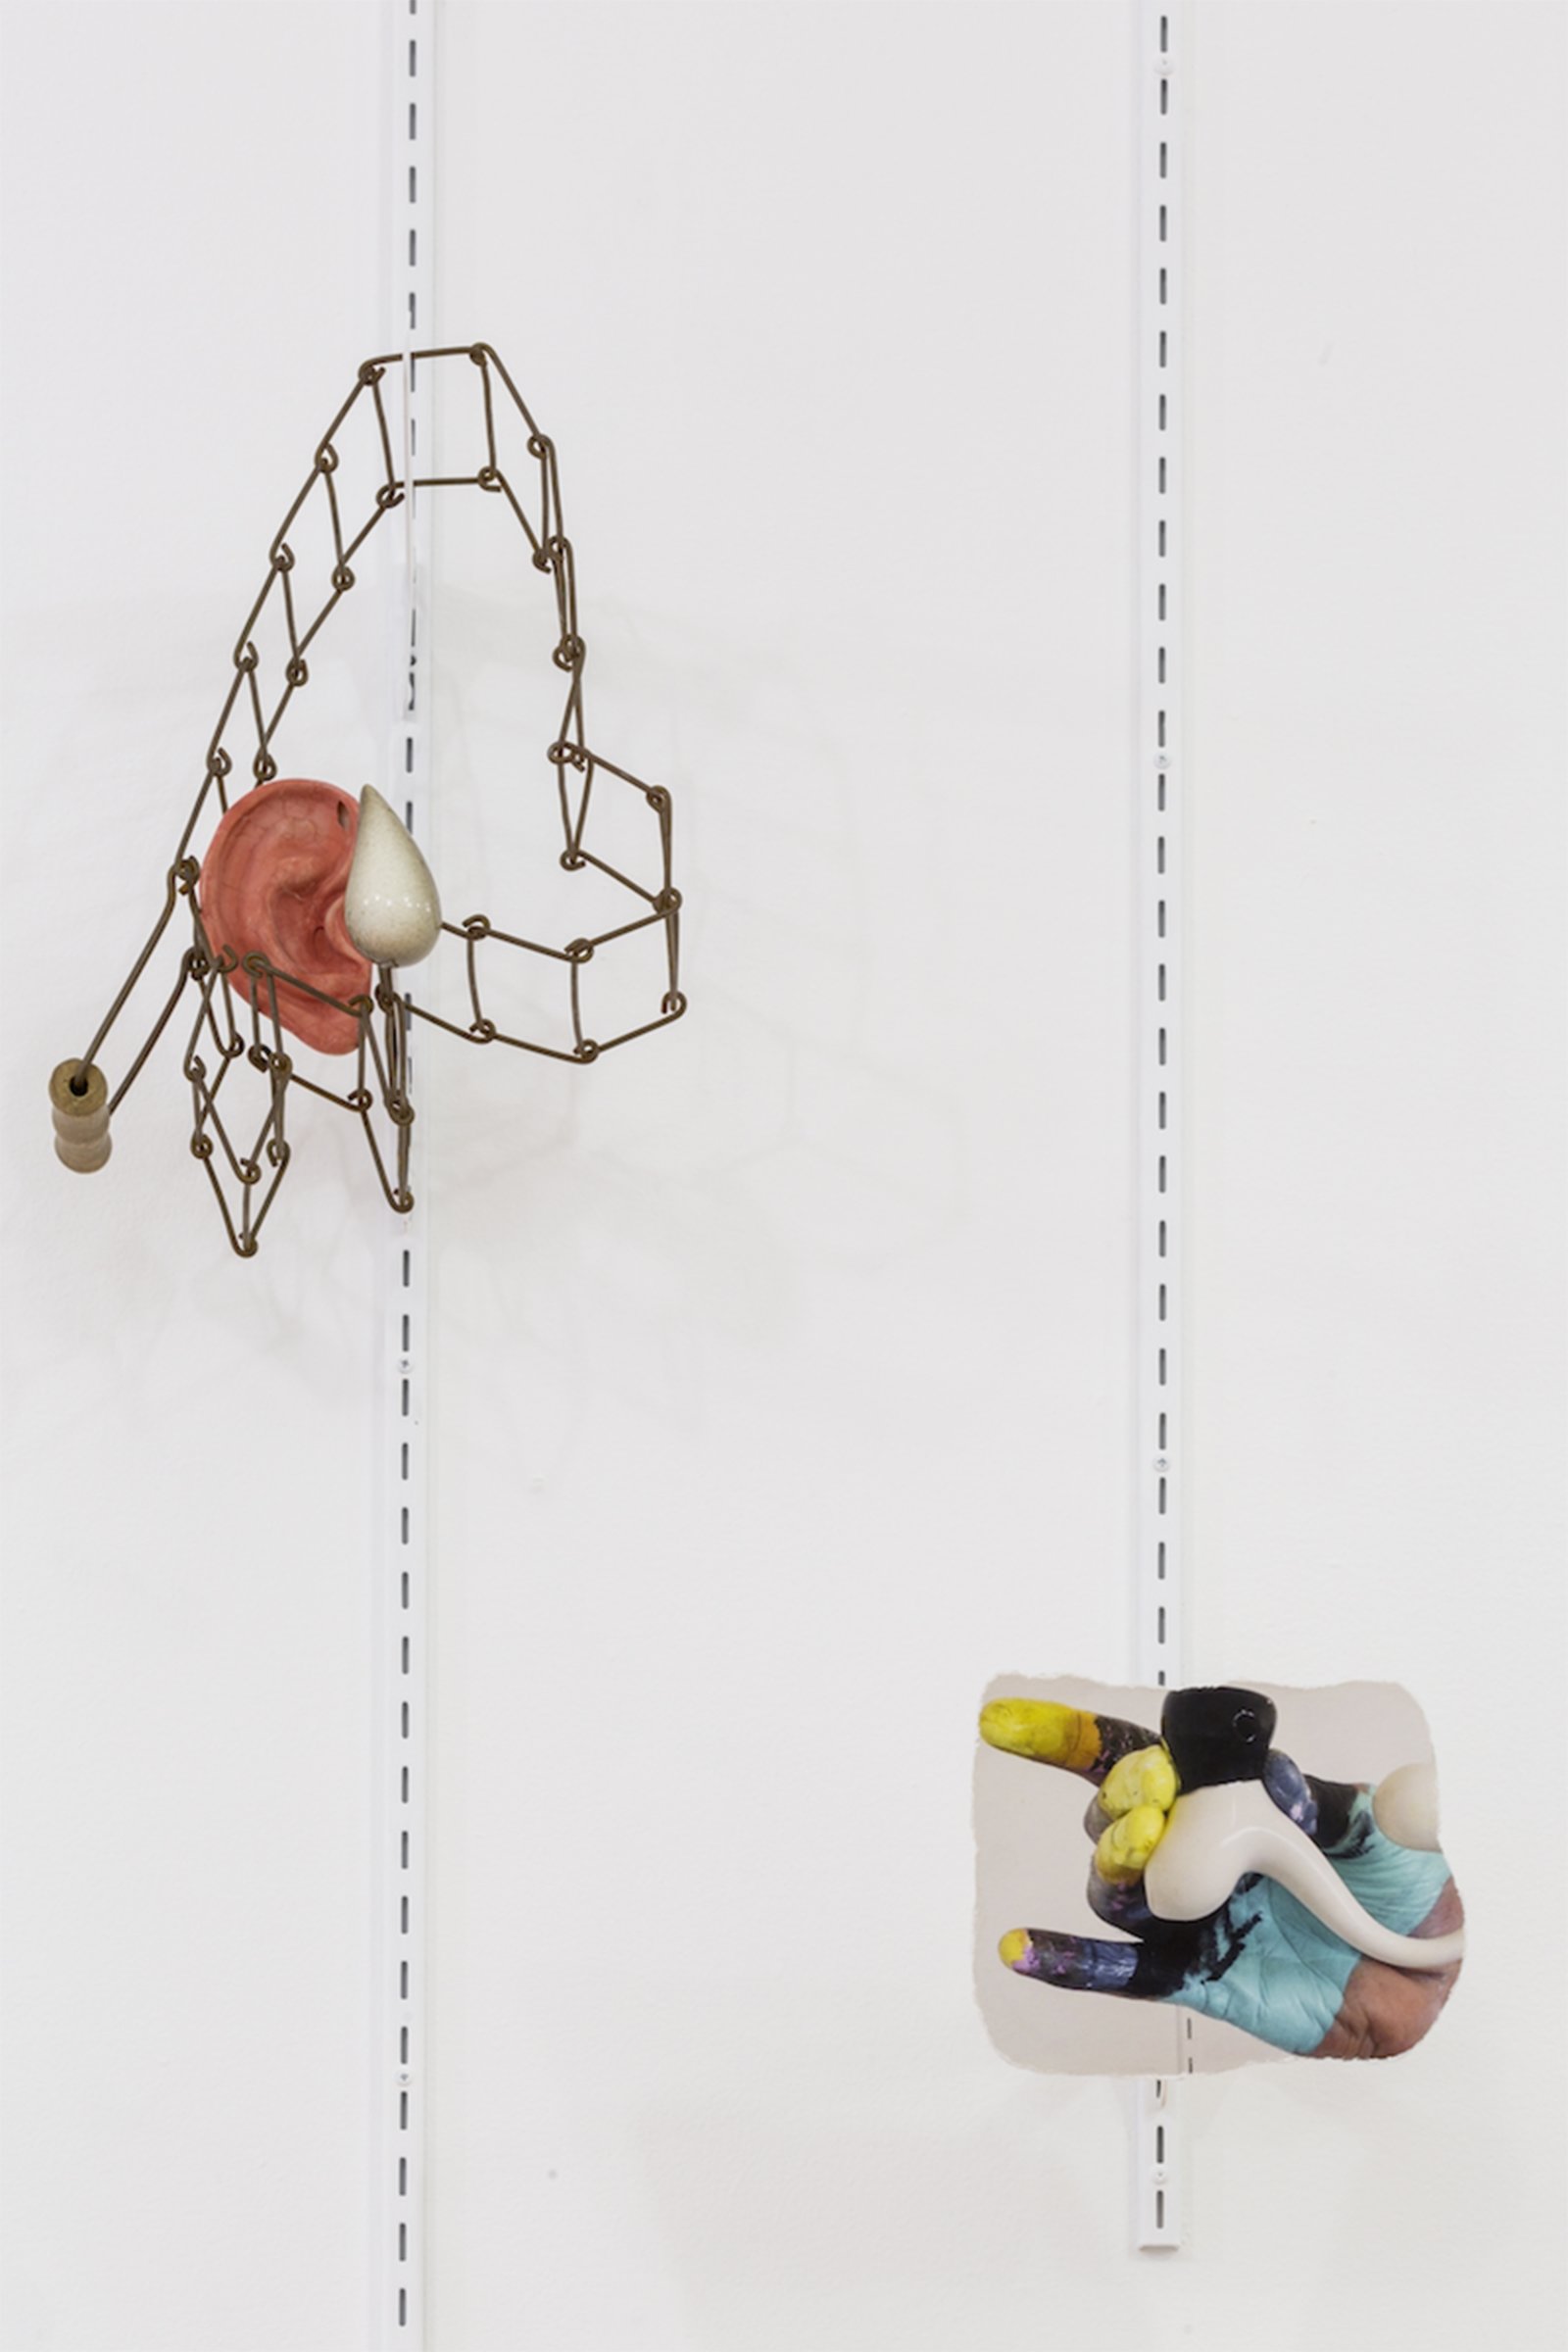 Valérie Blass, Why not / une touche, 2014, found objects, FGR plaster, photograph mounted on FGR plaster, steel, 14 x 8 x 9 in. (34 x 19 x 23 cm)